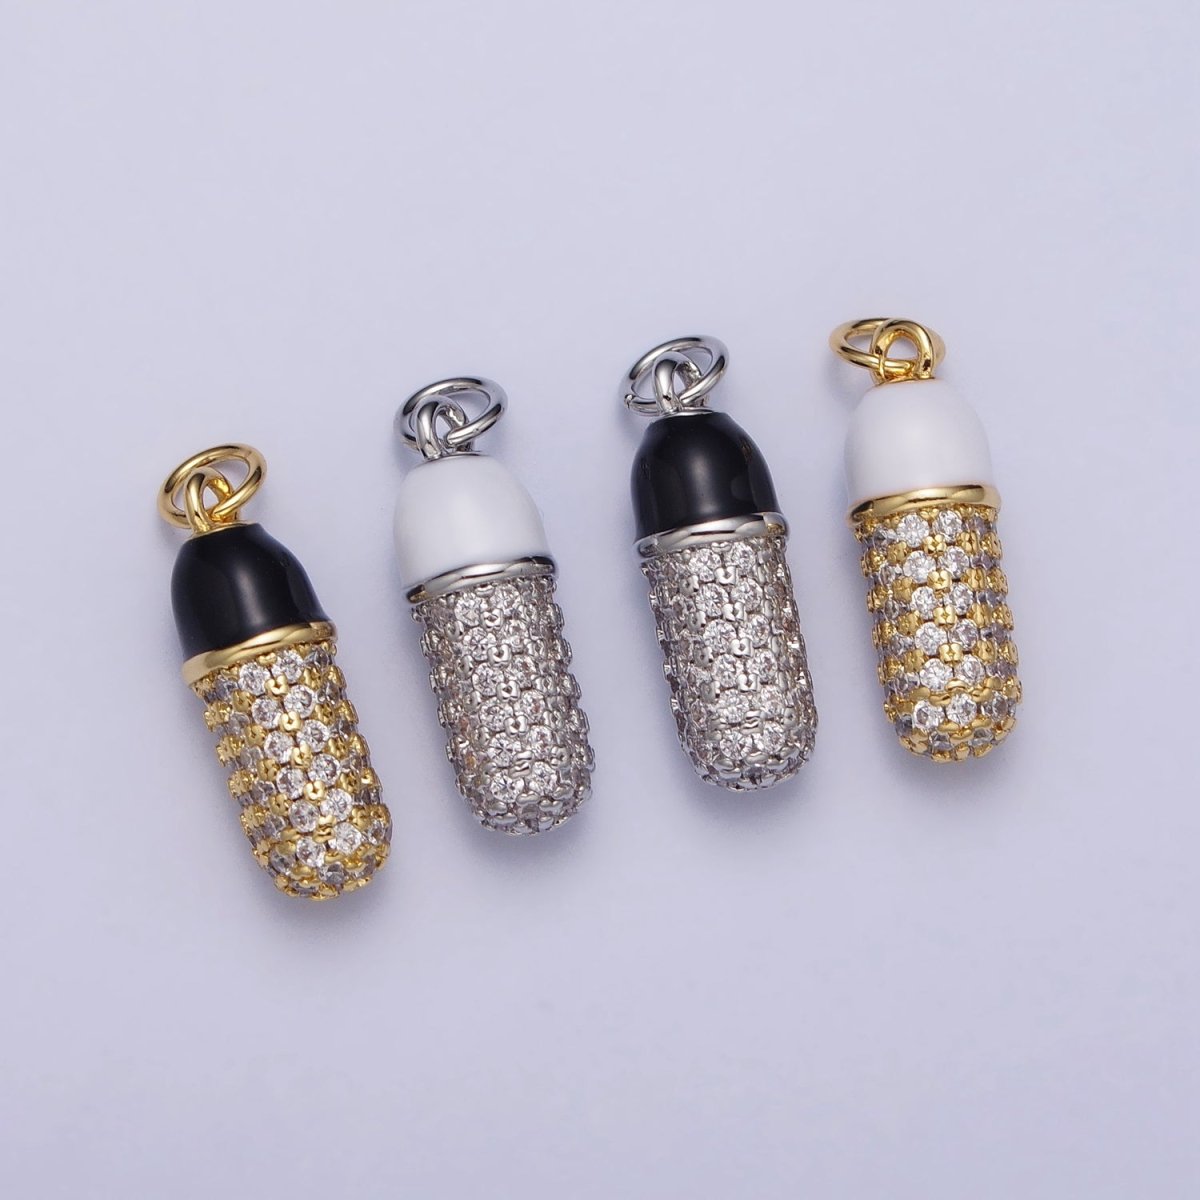 24K Gold Filled Black, White Enamel Micro Paved CZ Pill Oblong Add-On Charm in Silver & Gold | AC402 - AC405 - DLUXCA